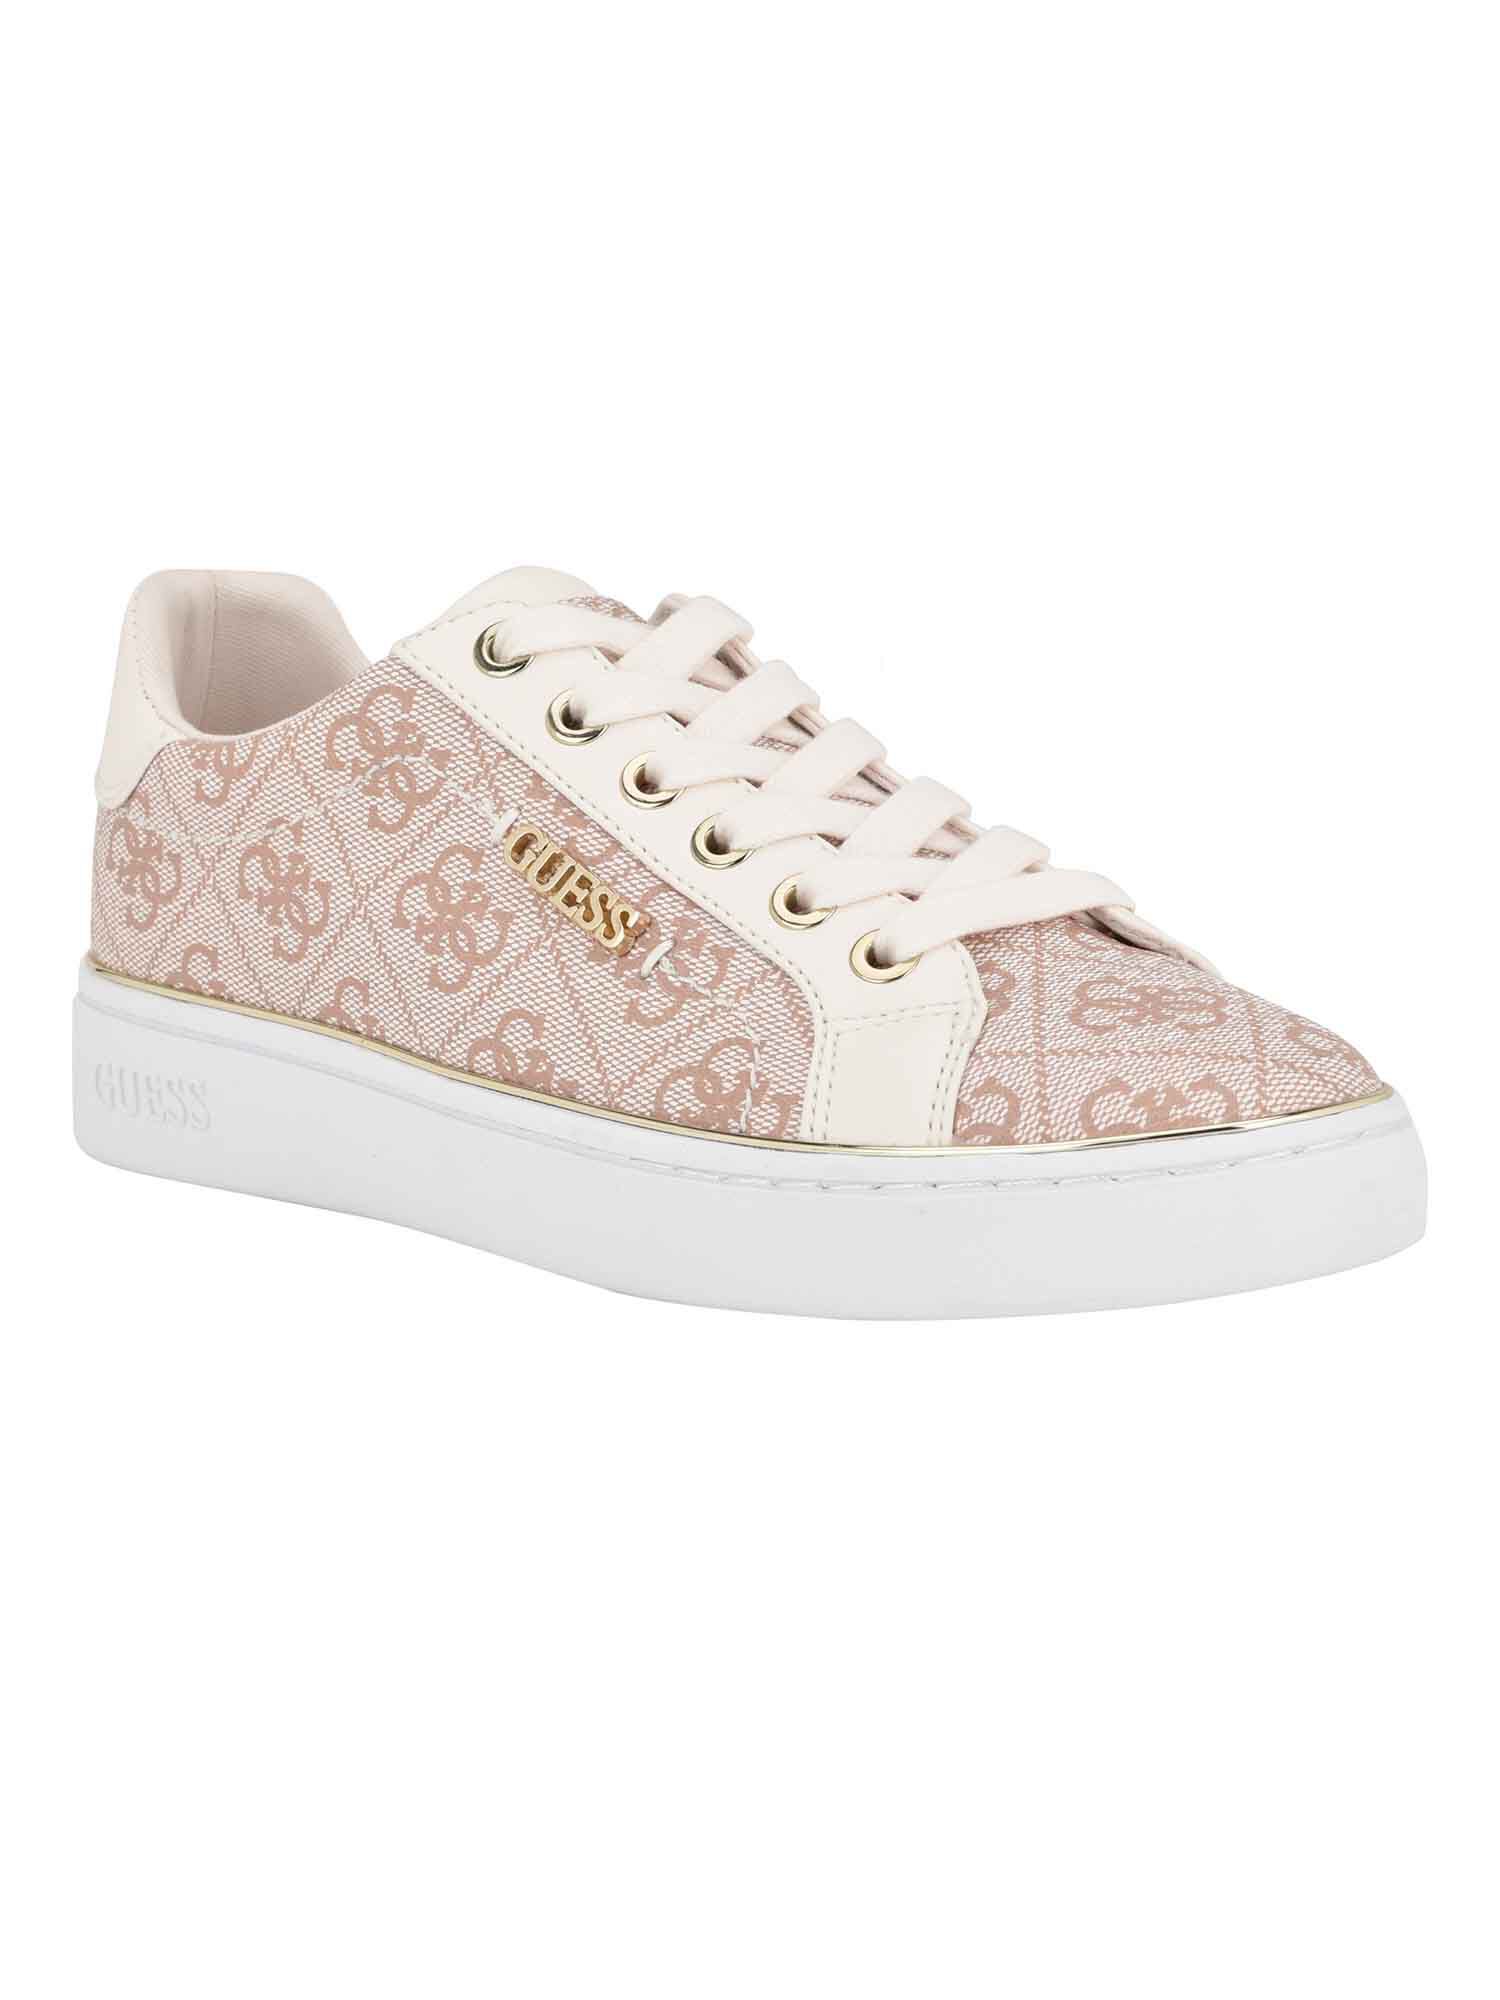 Guess Sneakers | Guess shoes sneakers, Guess sneakers, Guess shoes